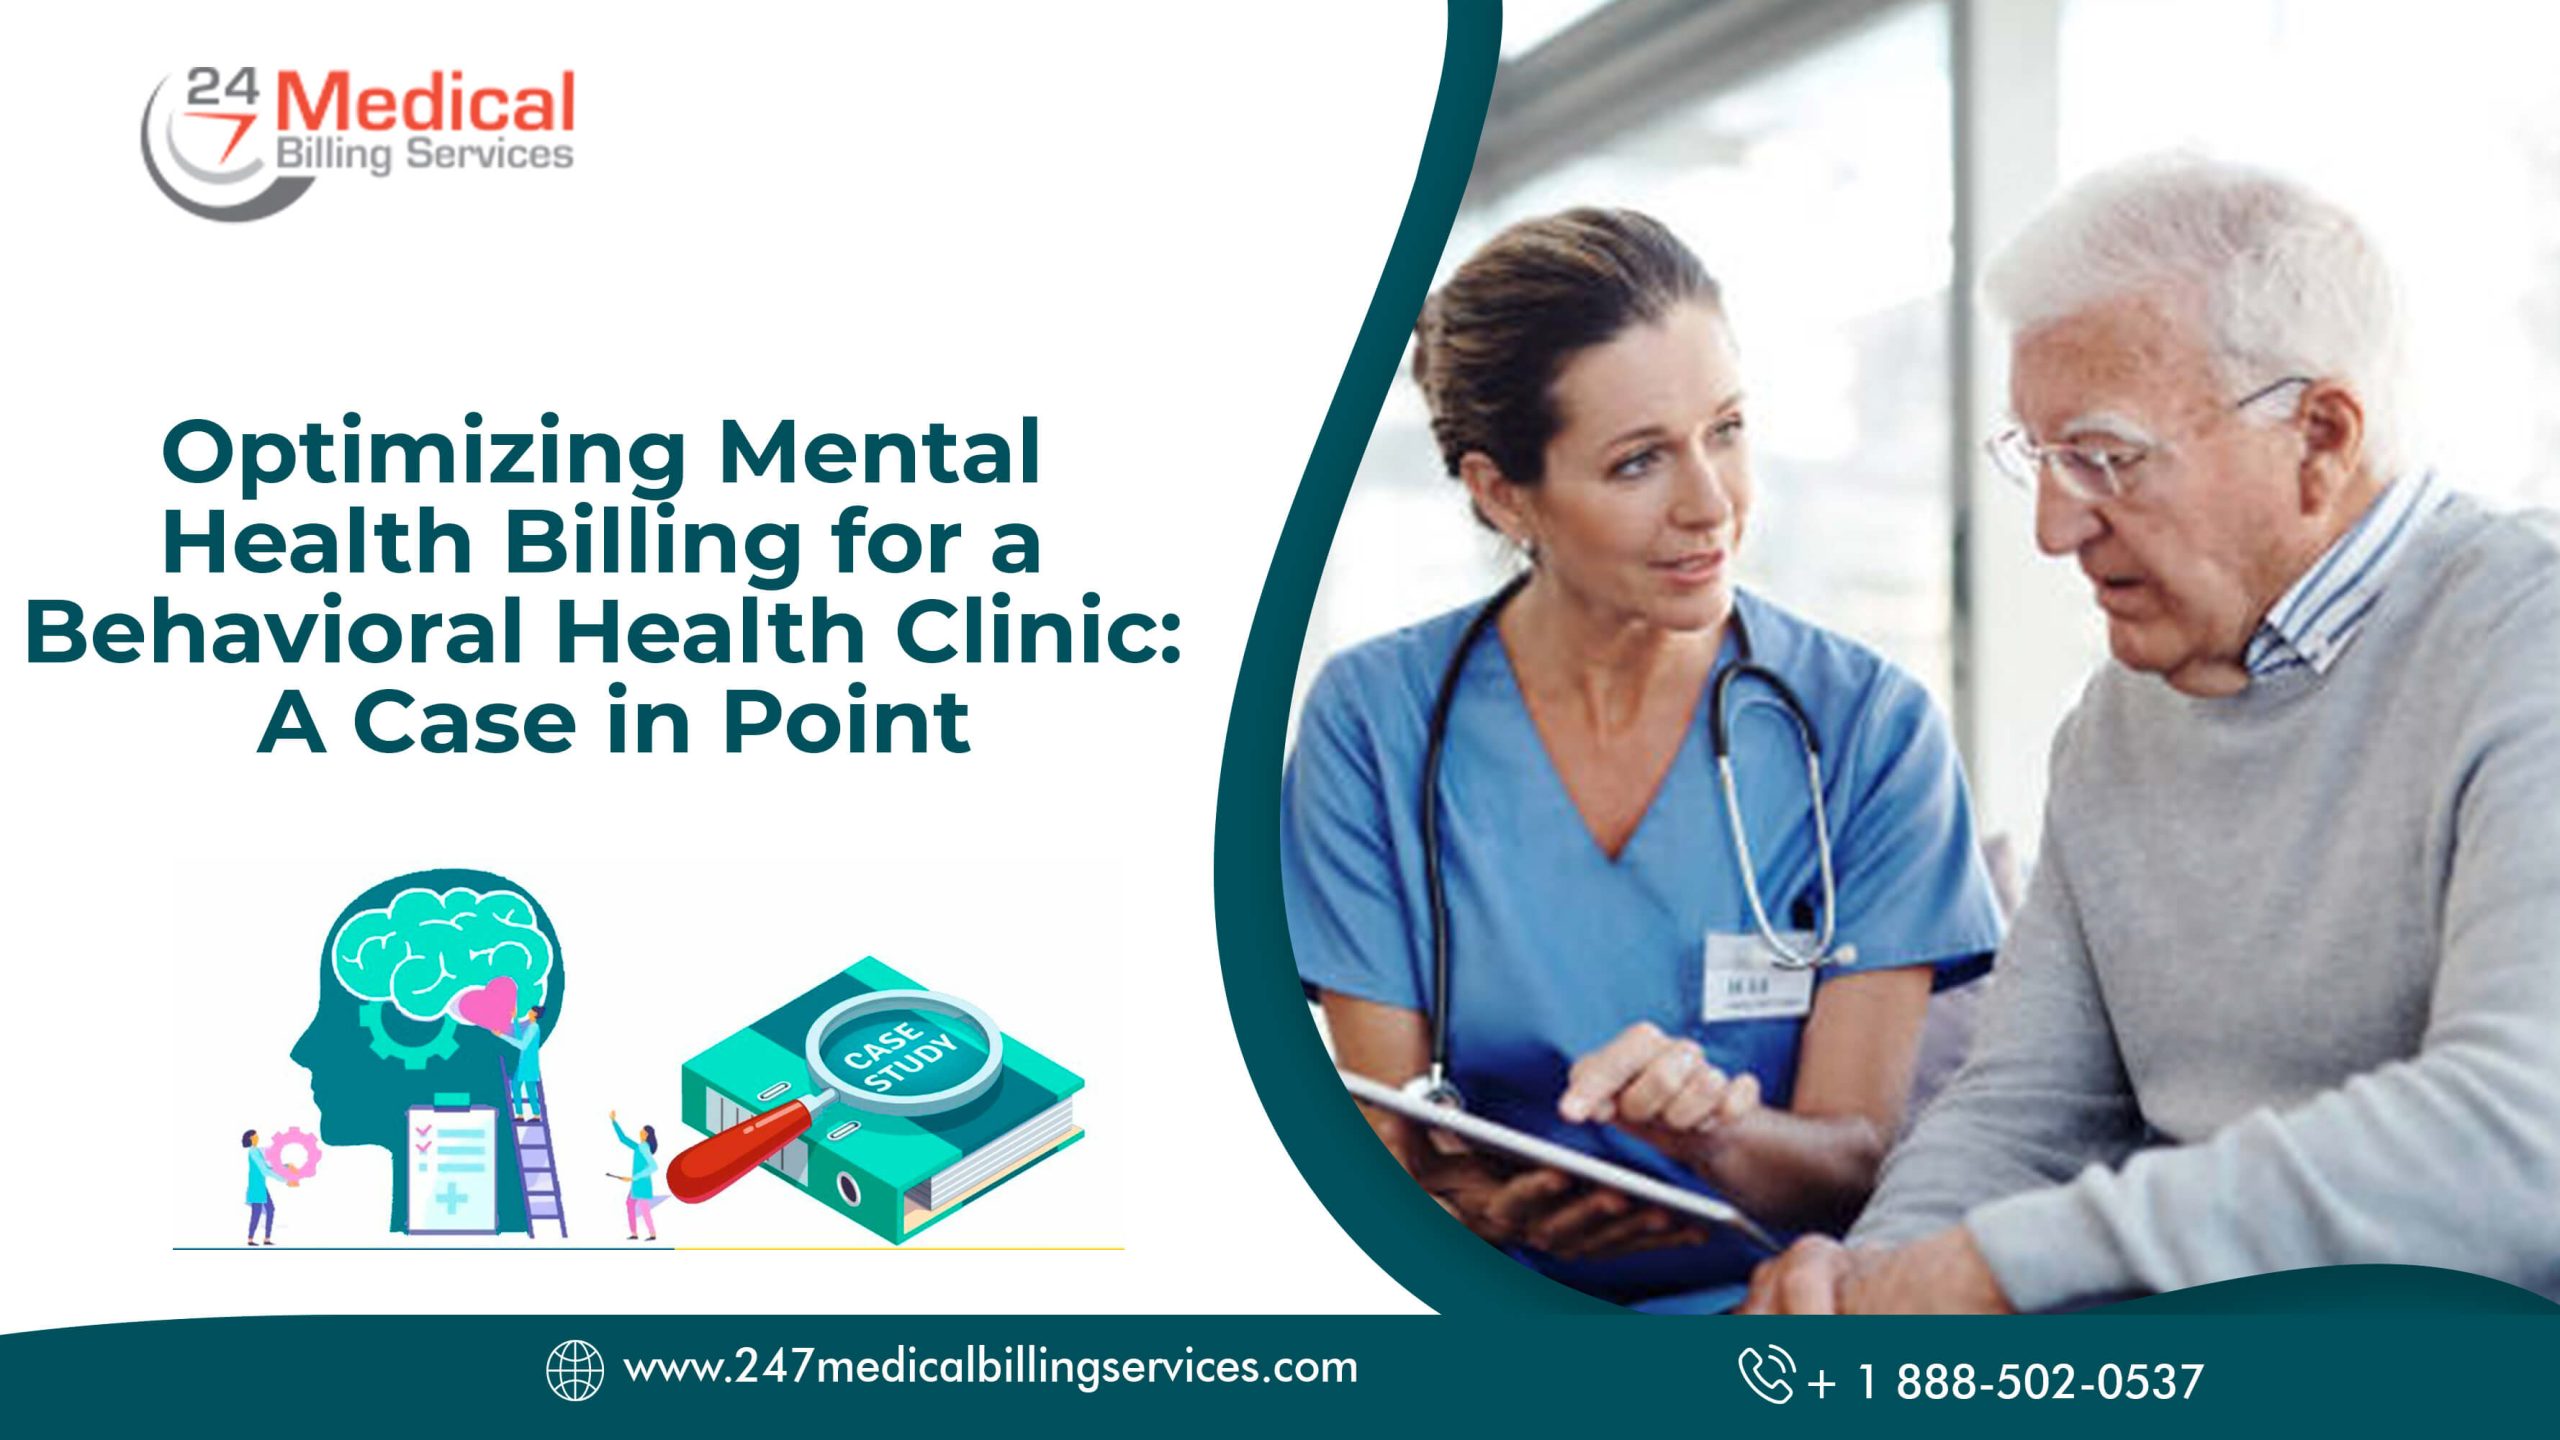  Optimizing Mental Health Billing for a Behavioral Health Clinic: A Case in Point